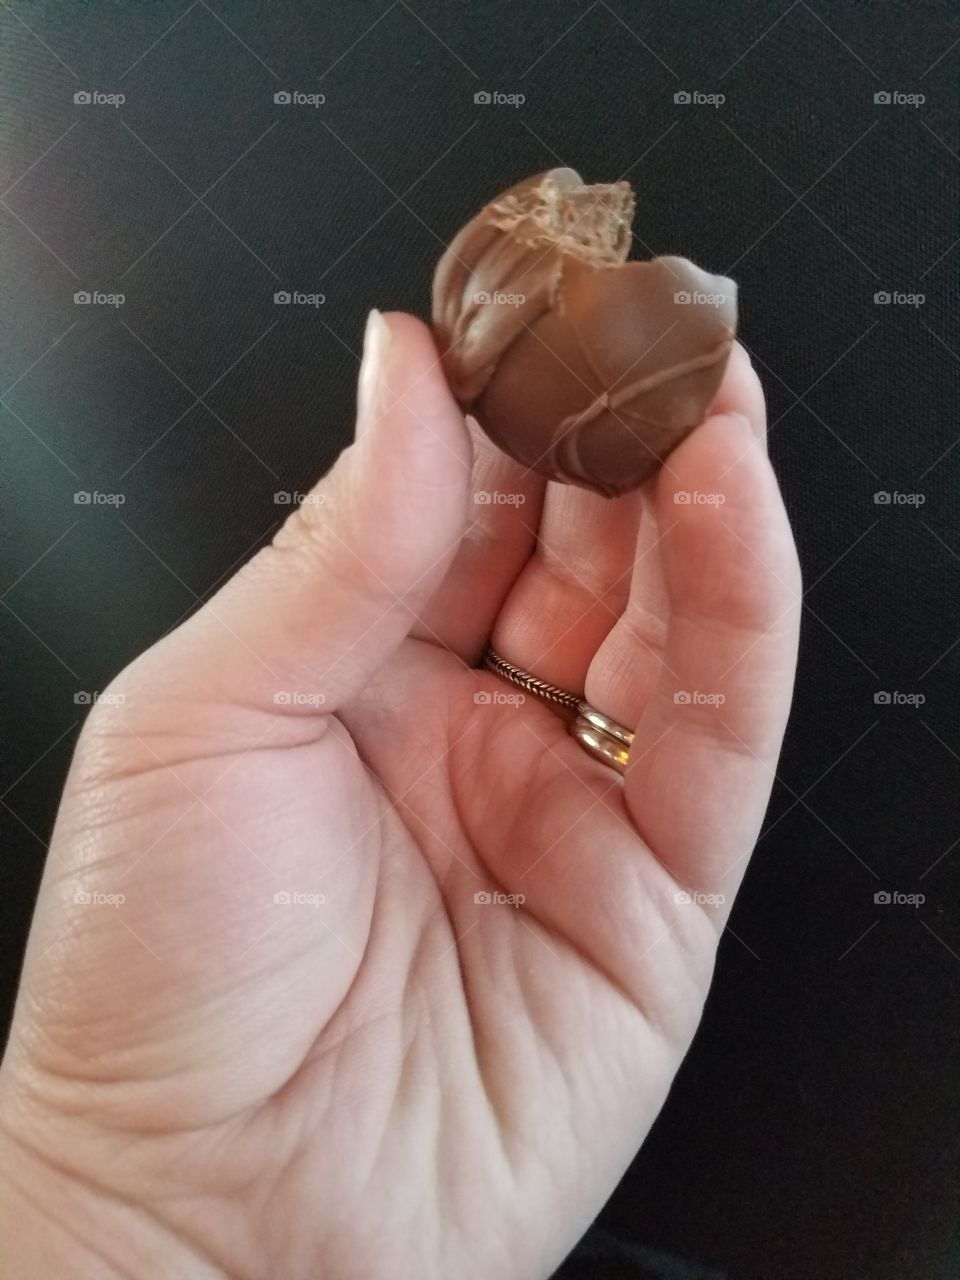 A person holding a chocolate